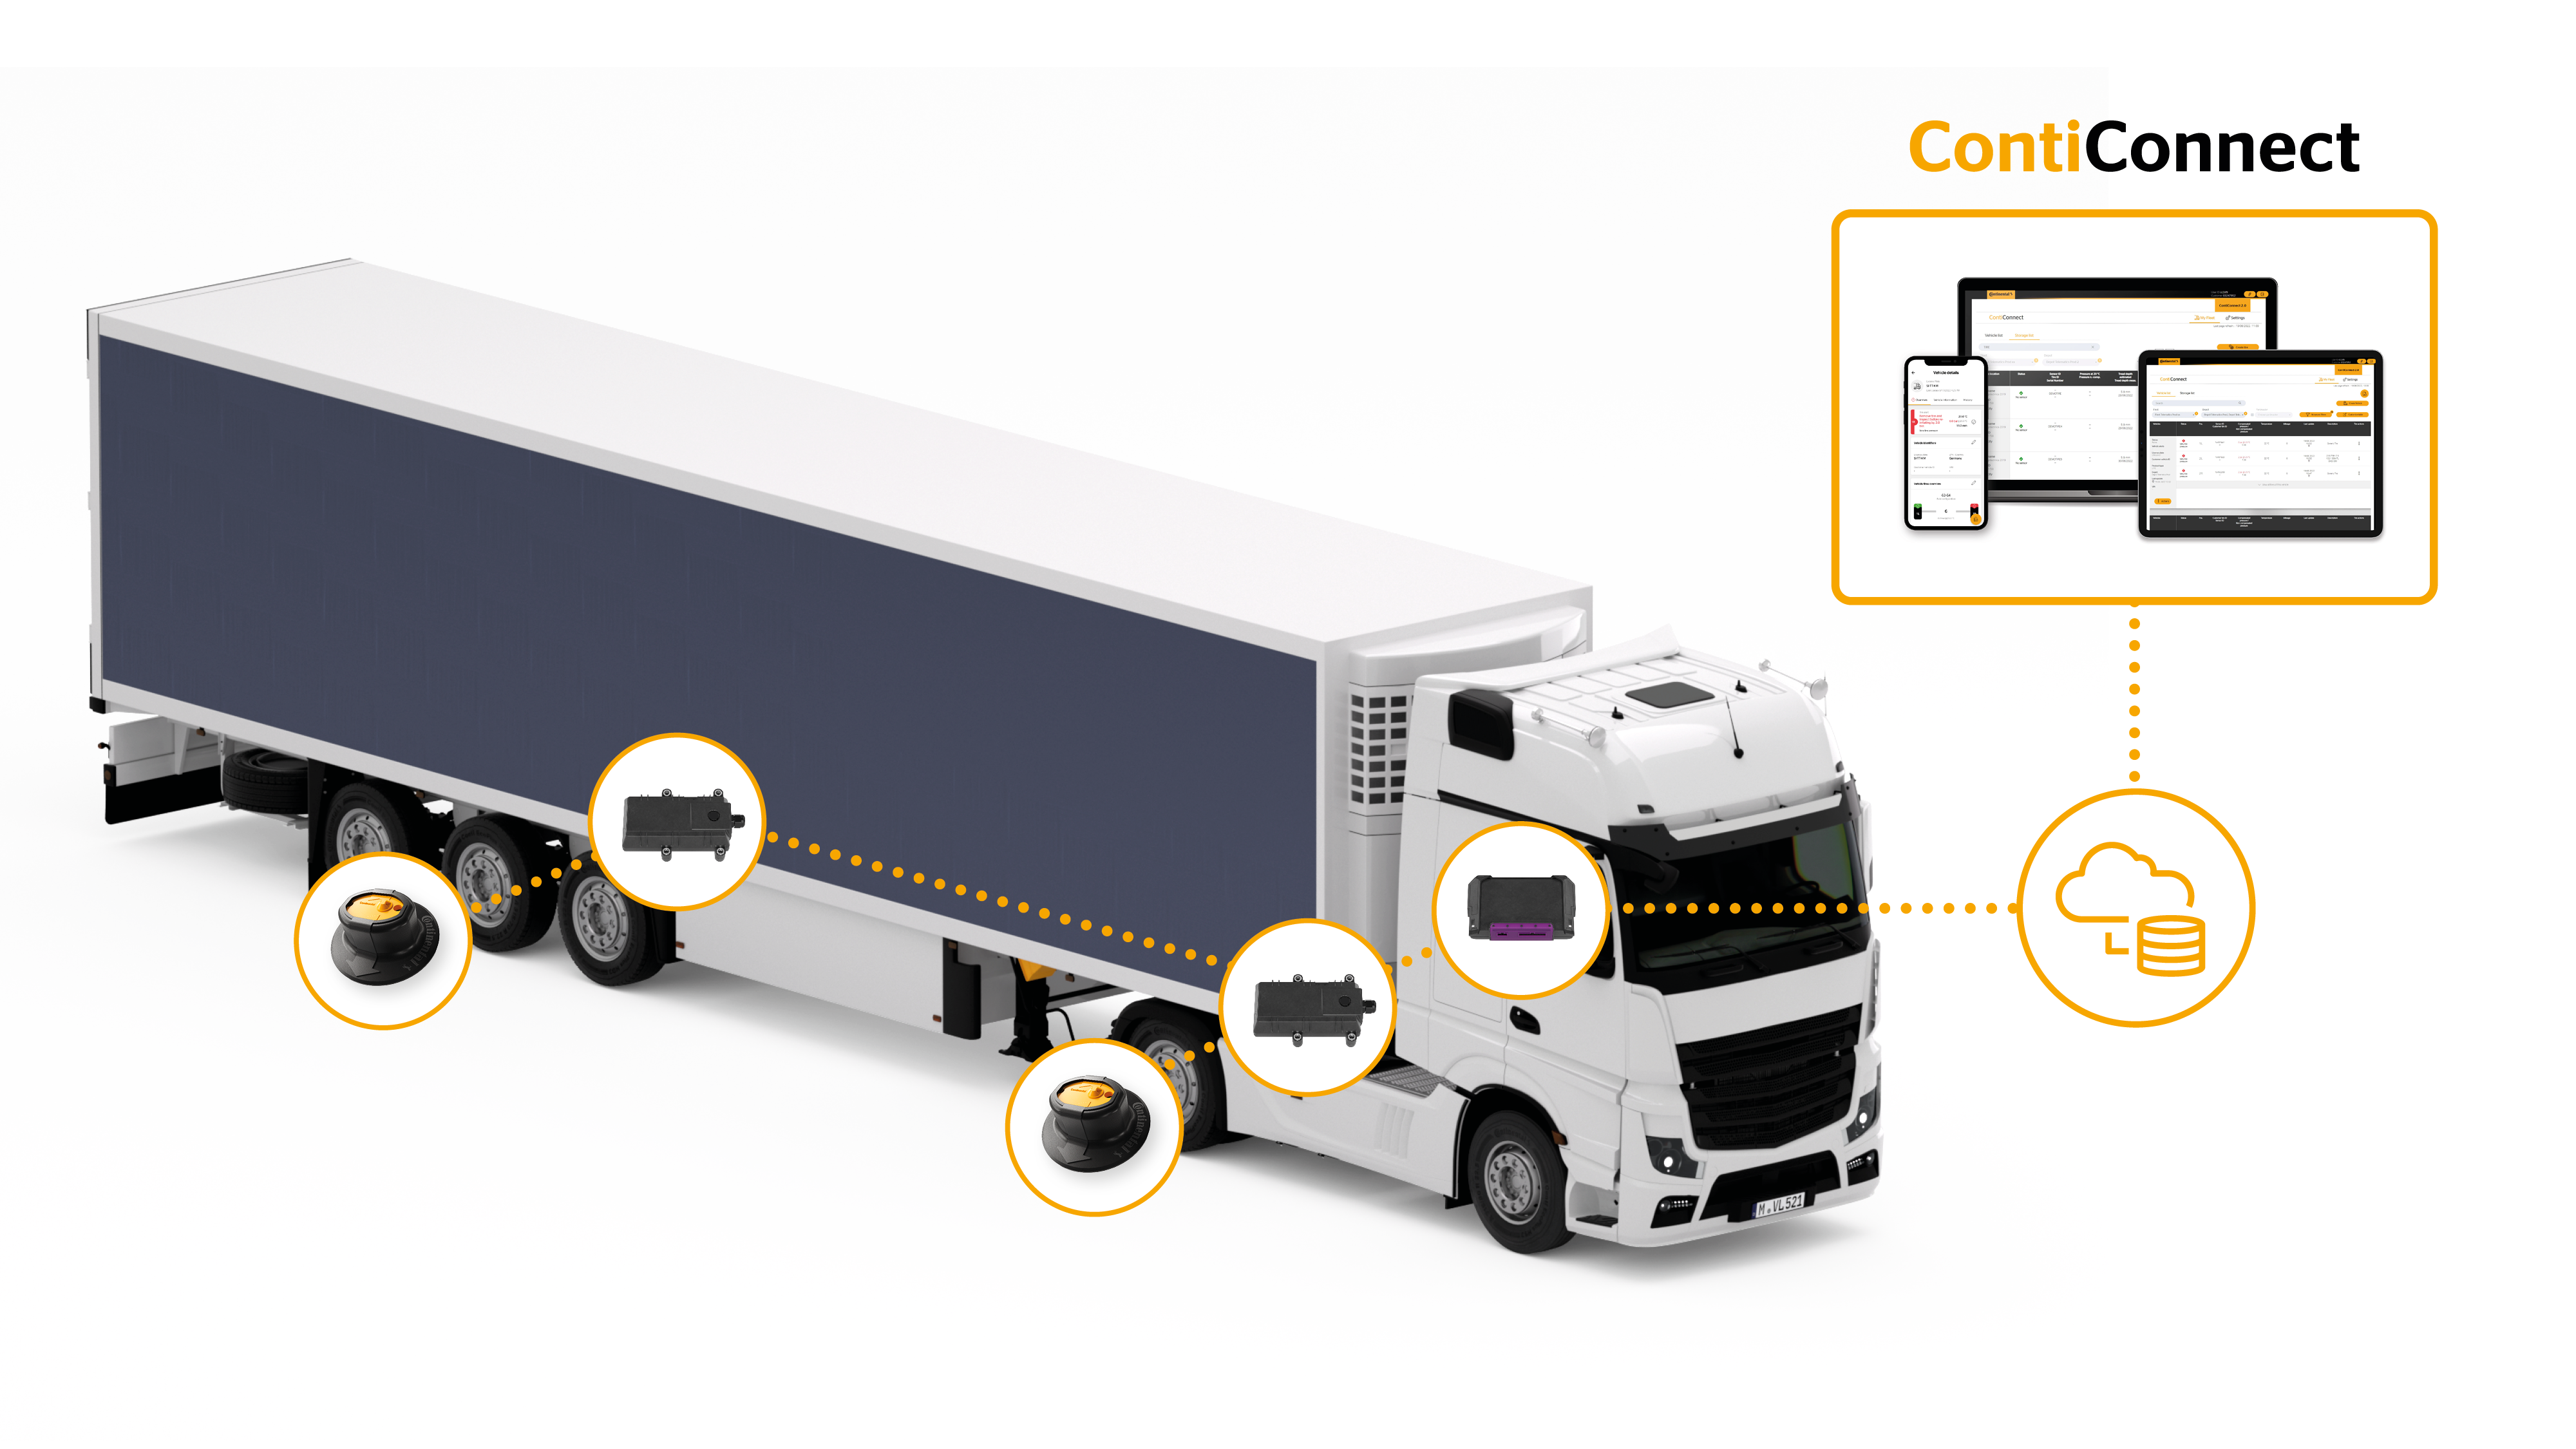 Graphic showing different ContiConnect components on a Truck